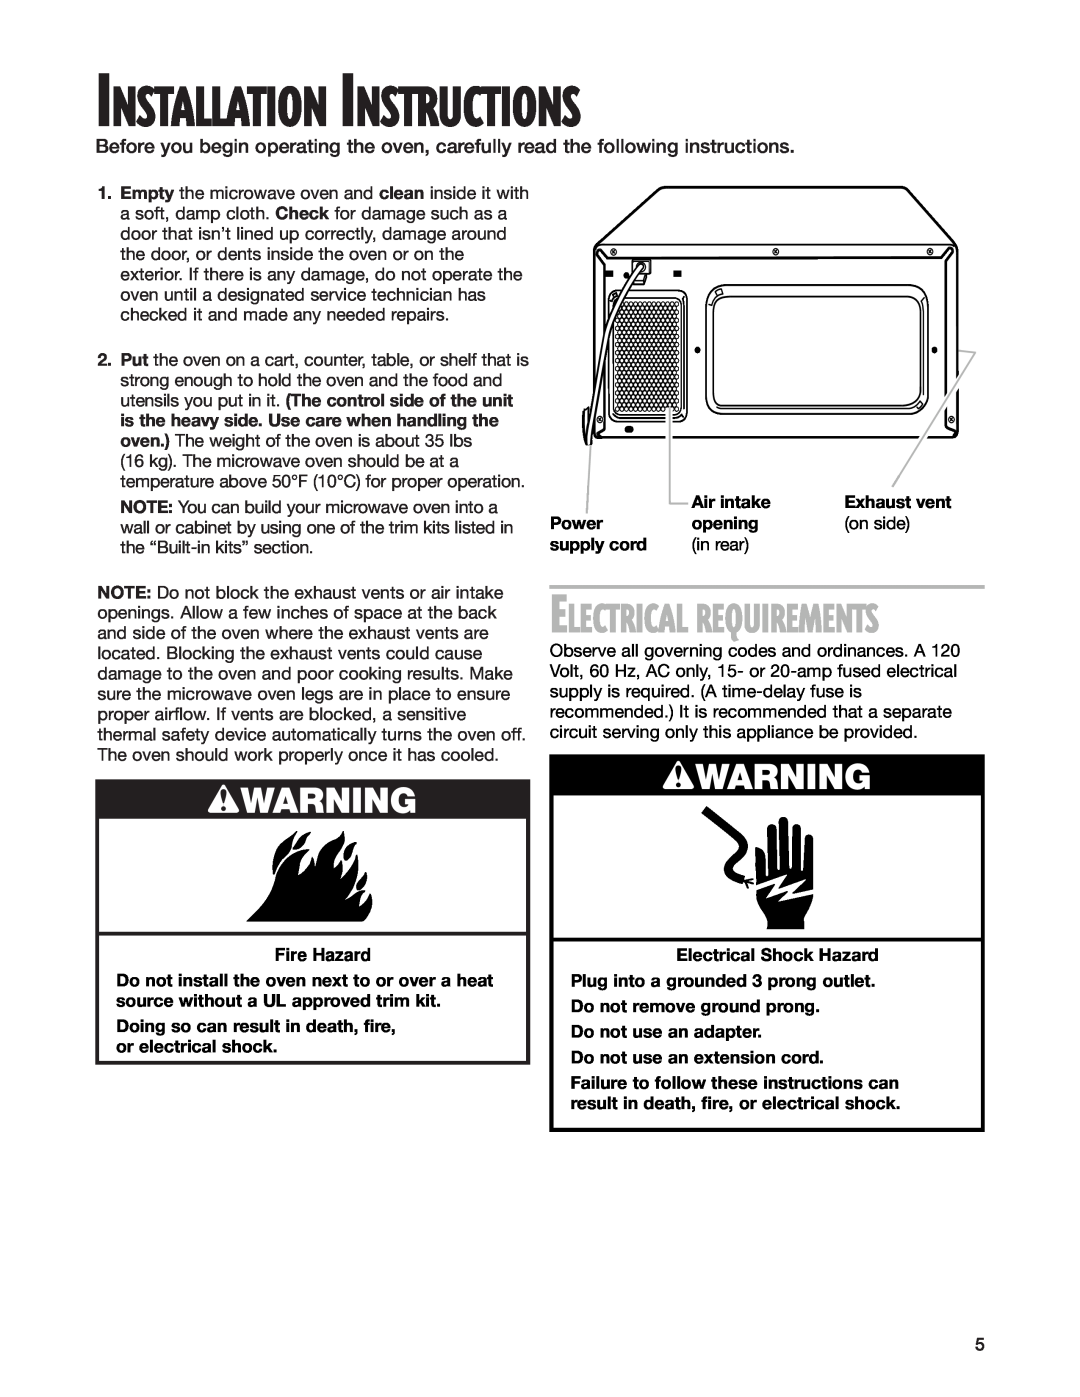 Whirlpool MT4210SK, MT4140SK installation instructions wWARNING, Electrical Requirements, Installation Instructions 